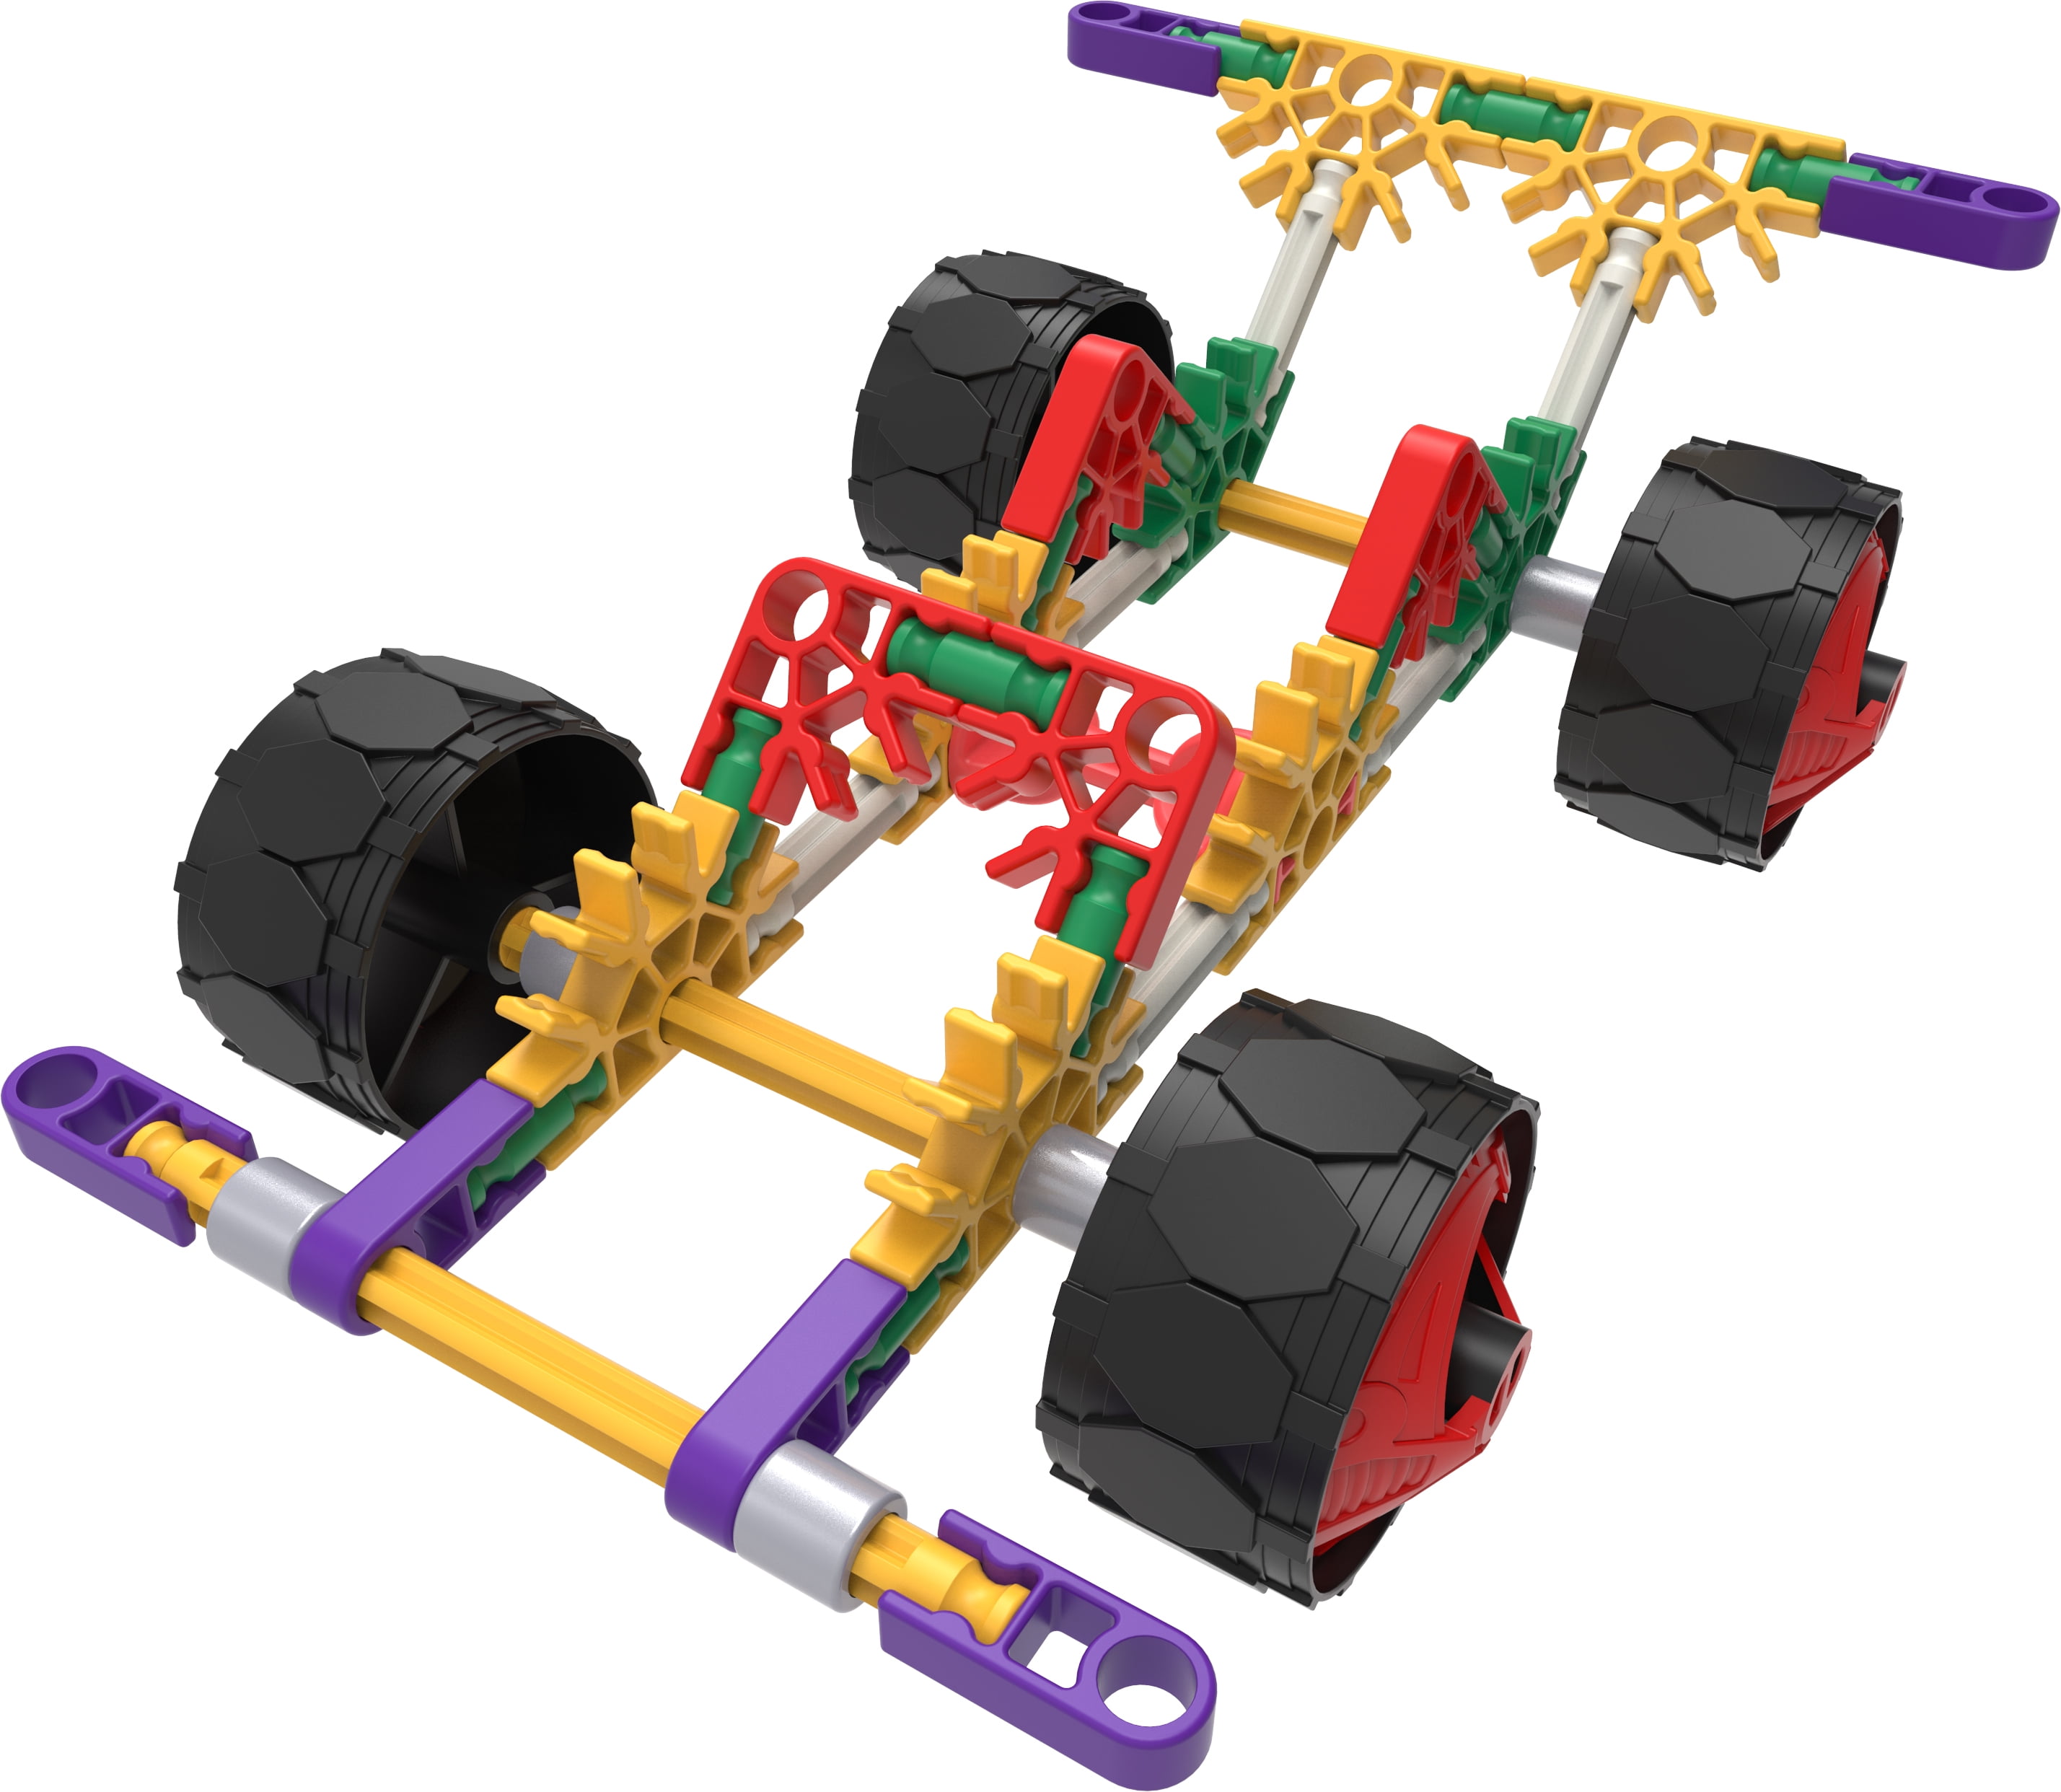 K'NEX Beginner 40 Model Building Set - 141 parts - Ages 5 and up - Creative  Building Toy